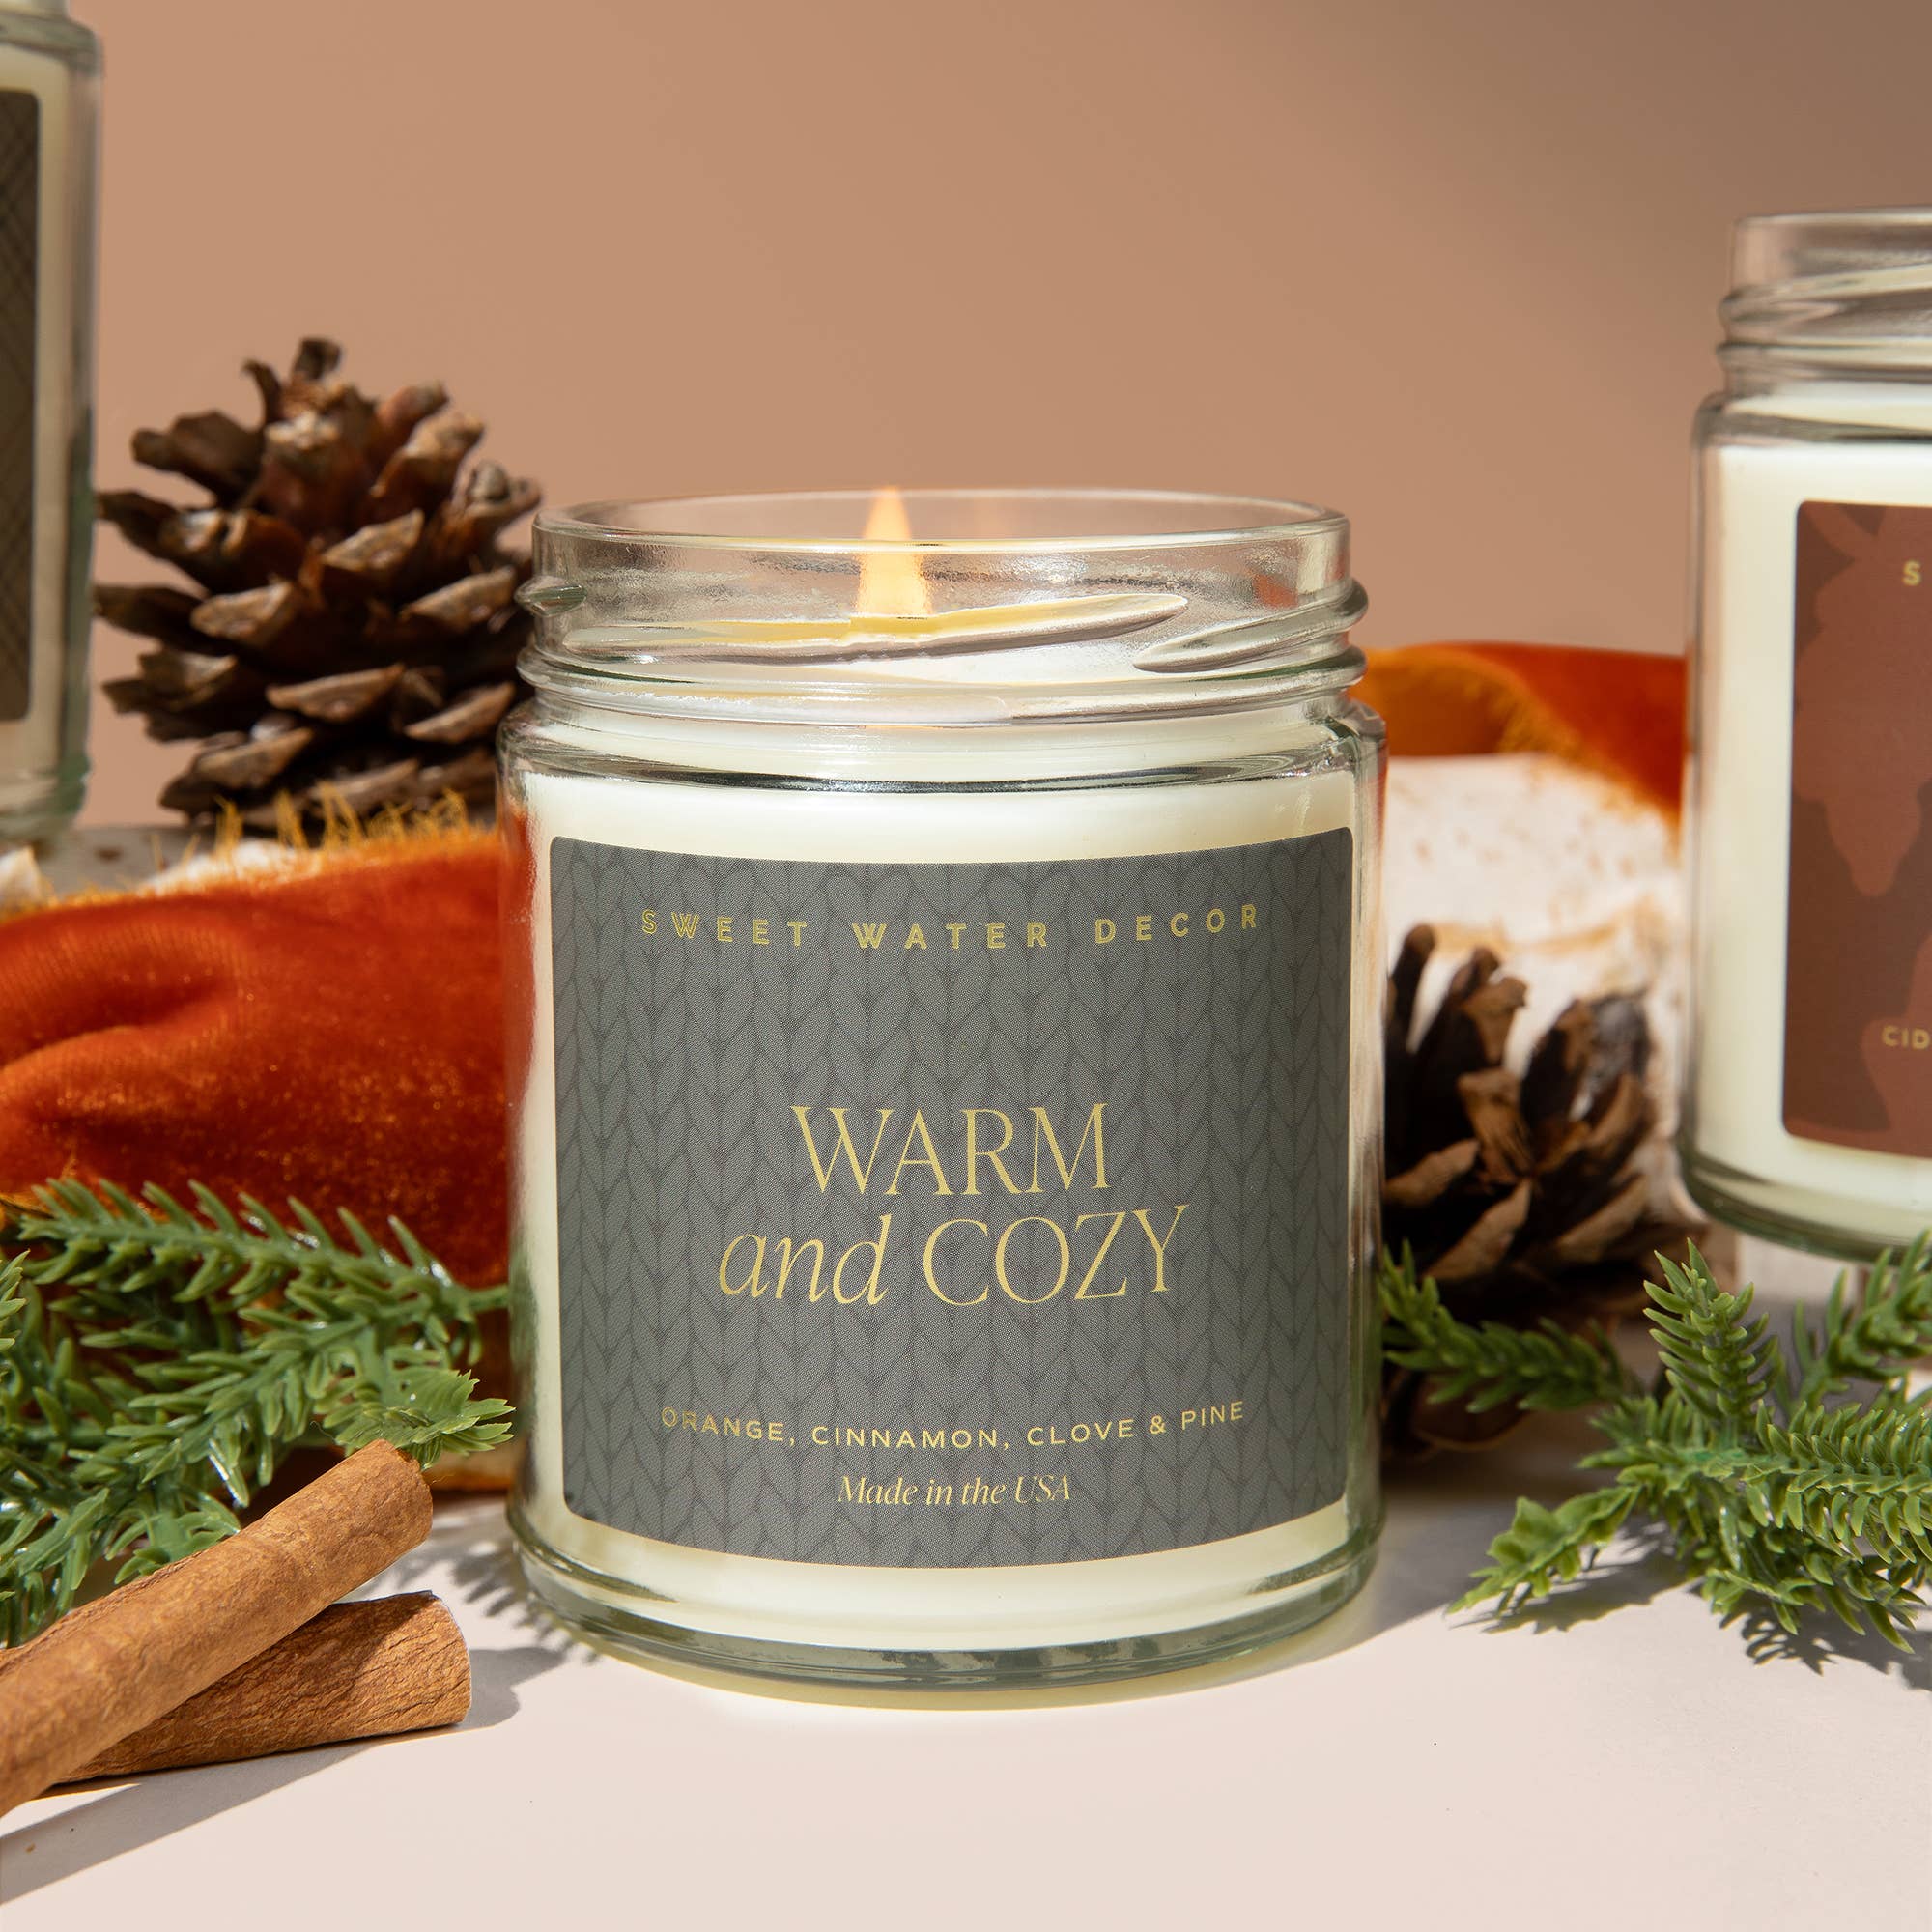 Warm and Cozy 9 oz Soy Candle - Home Decor & Gifts